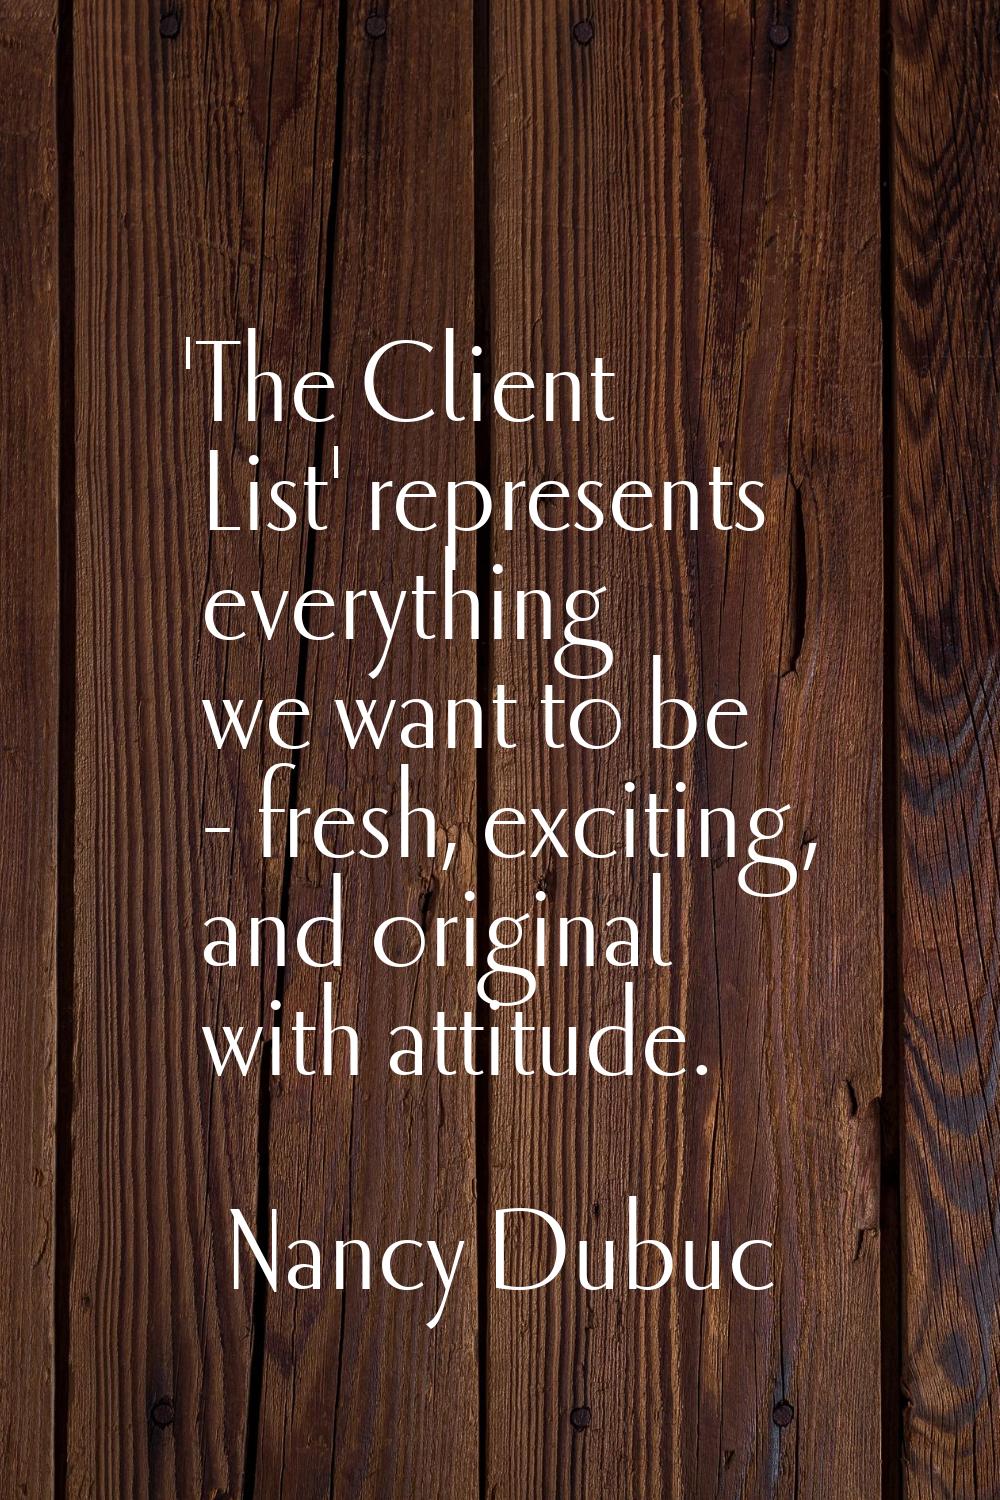 'The Client List' represents everything we want to be - fresh, exciting, and original with attitude